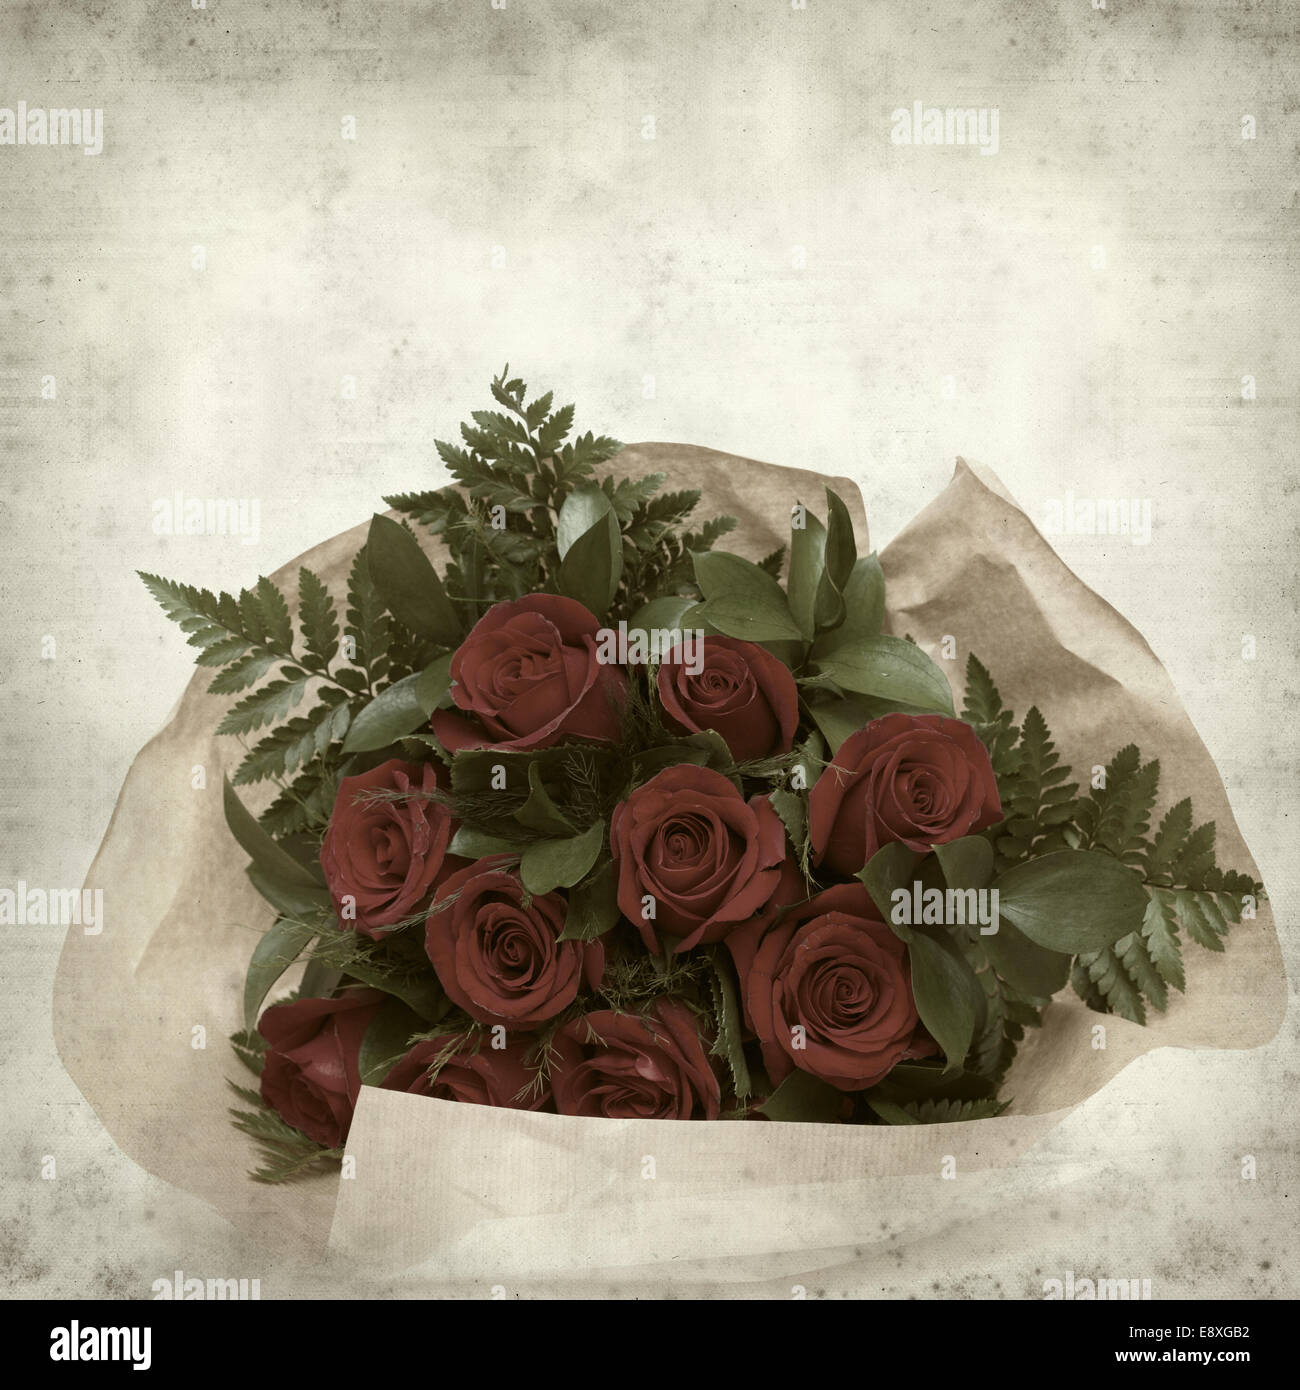 Grunge Background with Vintage Album with Roses Stock Illustration -  Illustration of happy, flowers: 150456672